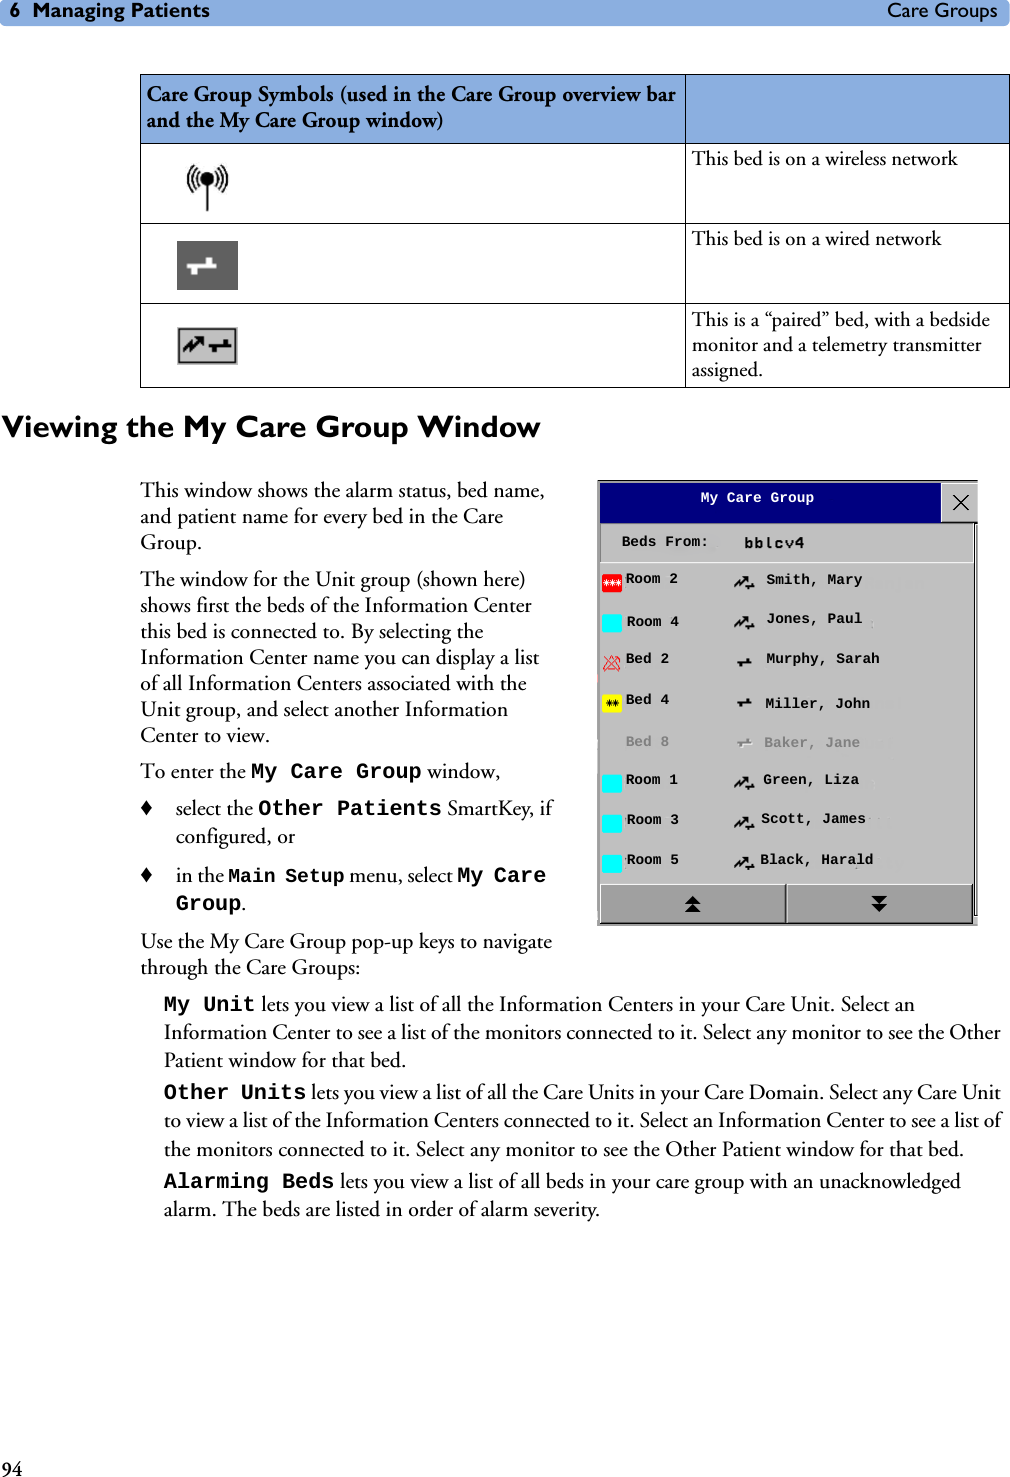 6 Managing Patients Care Groups94Viewing the My Care Group WindowThis window shows the alarm status, bed name, and patient name for every bed in the Care Group. The window for the Unit group (shown here) shows first the beds of the Information Center this bed is connected to. By selecting the Information Center name you can display a list of all Information Centers associated with the Unit group, and select another Information Center to view.To enter the My Care Group window, ♦select the Other Patients SmartKey, if configured, or ♦in the Main Setup menu, select My Care Group.Use the My Care Group pop-up keys to navigate through the Care Groups:My Unit lets you view a list of all the Information Centers in your Care Unit. Select an Information Center to see a list of the monitors connected to it. Select any monitor to see the Other Patient window for that bed. Other Units lets you view a list of all the Care Units in your Care Domain. Select any Care Unit to view a list of the Information Centers connected to it. Select an Information Center to see a list of the monitors connected to it. Select any monitor to see the Other Patient window for that bed. Alarming Beds lets you view a list of all beds in your care group with an unacknowledged alarm. The beds are listed in order of alarm severity.This bed is on a wireless networkThis bed is on a wired networkThis is a “paired” bed, with a bedside monitor and a telemetry transmitter assigned.Care Group Symbols (used in the Care Group overview bar and the My Care Group window)Beds From:Room 2Room 4Bed 2Bed 4Bed 8Room 1Room 3Room 5Smith, MaryJones, PaulMurphy, SarahMiller, JohnBaker, JaneGreen, LizaScott, JamesBlack, HaraldMy Care Group